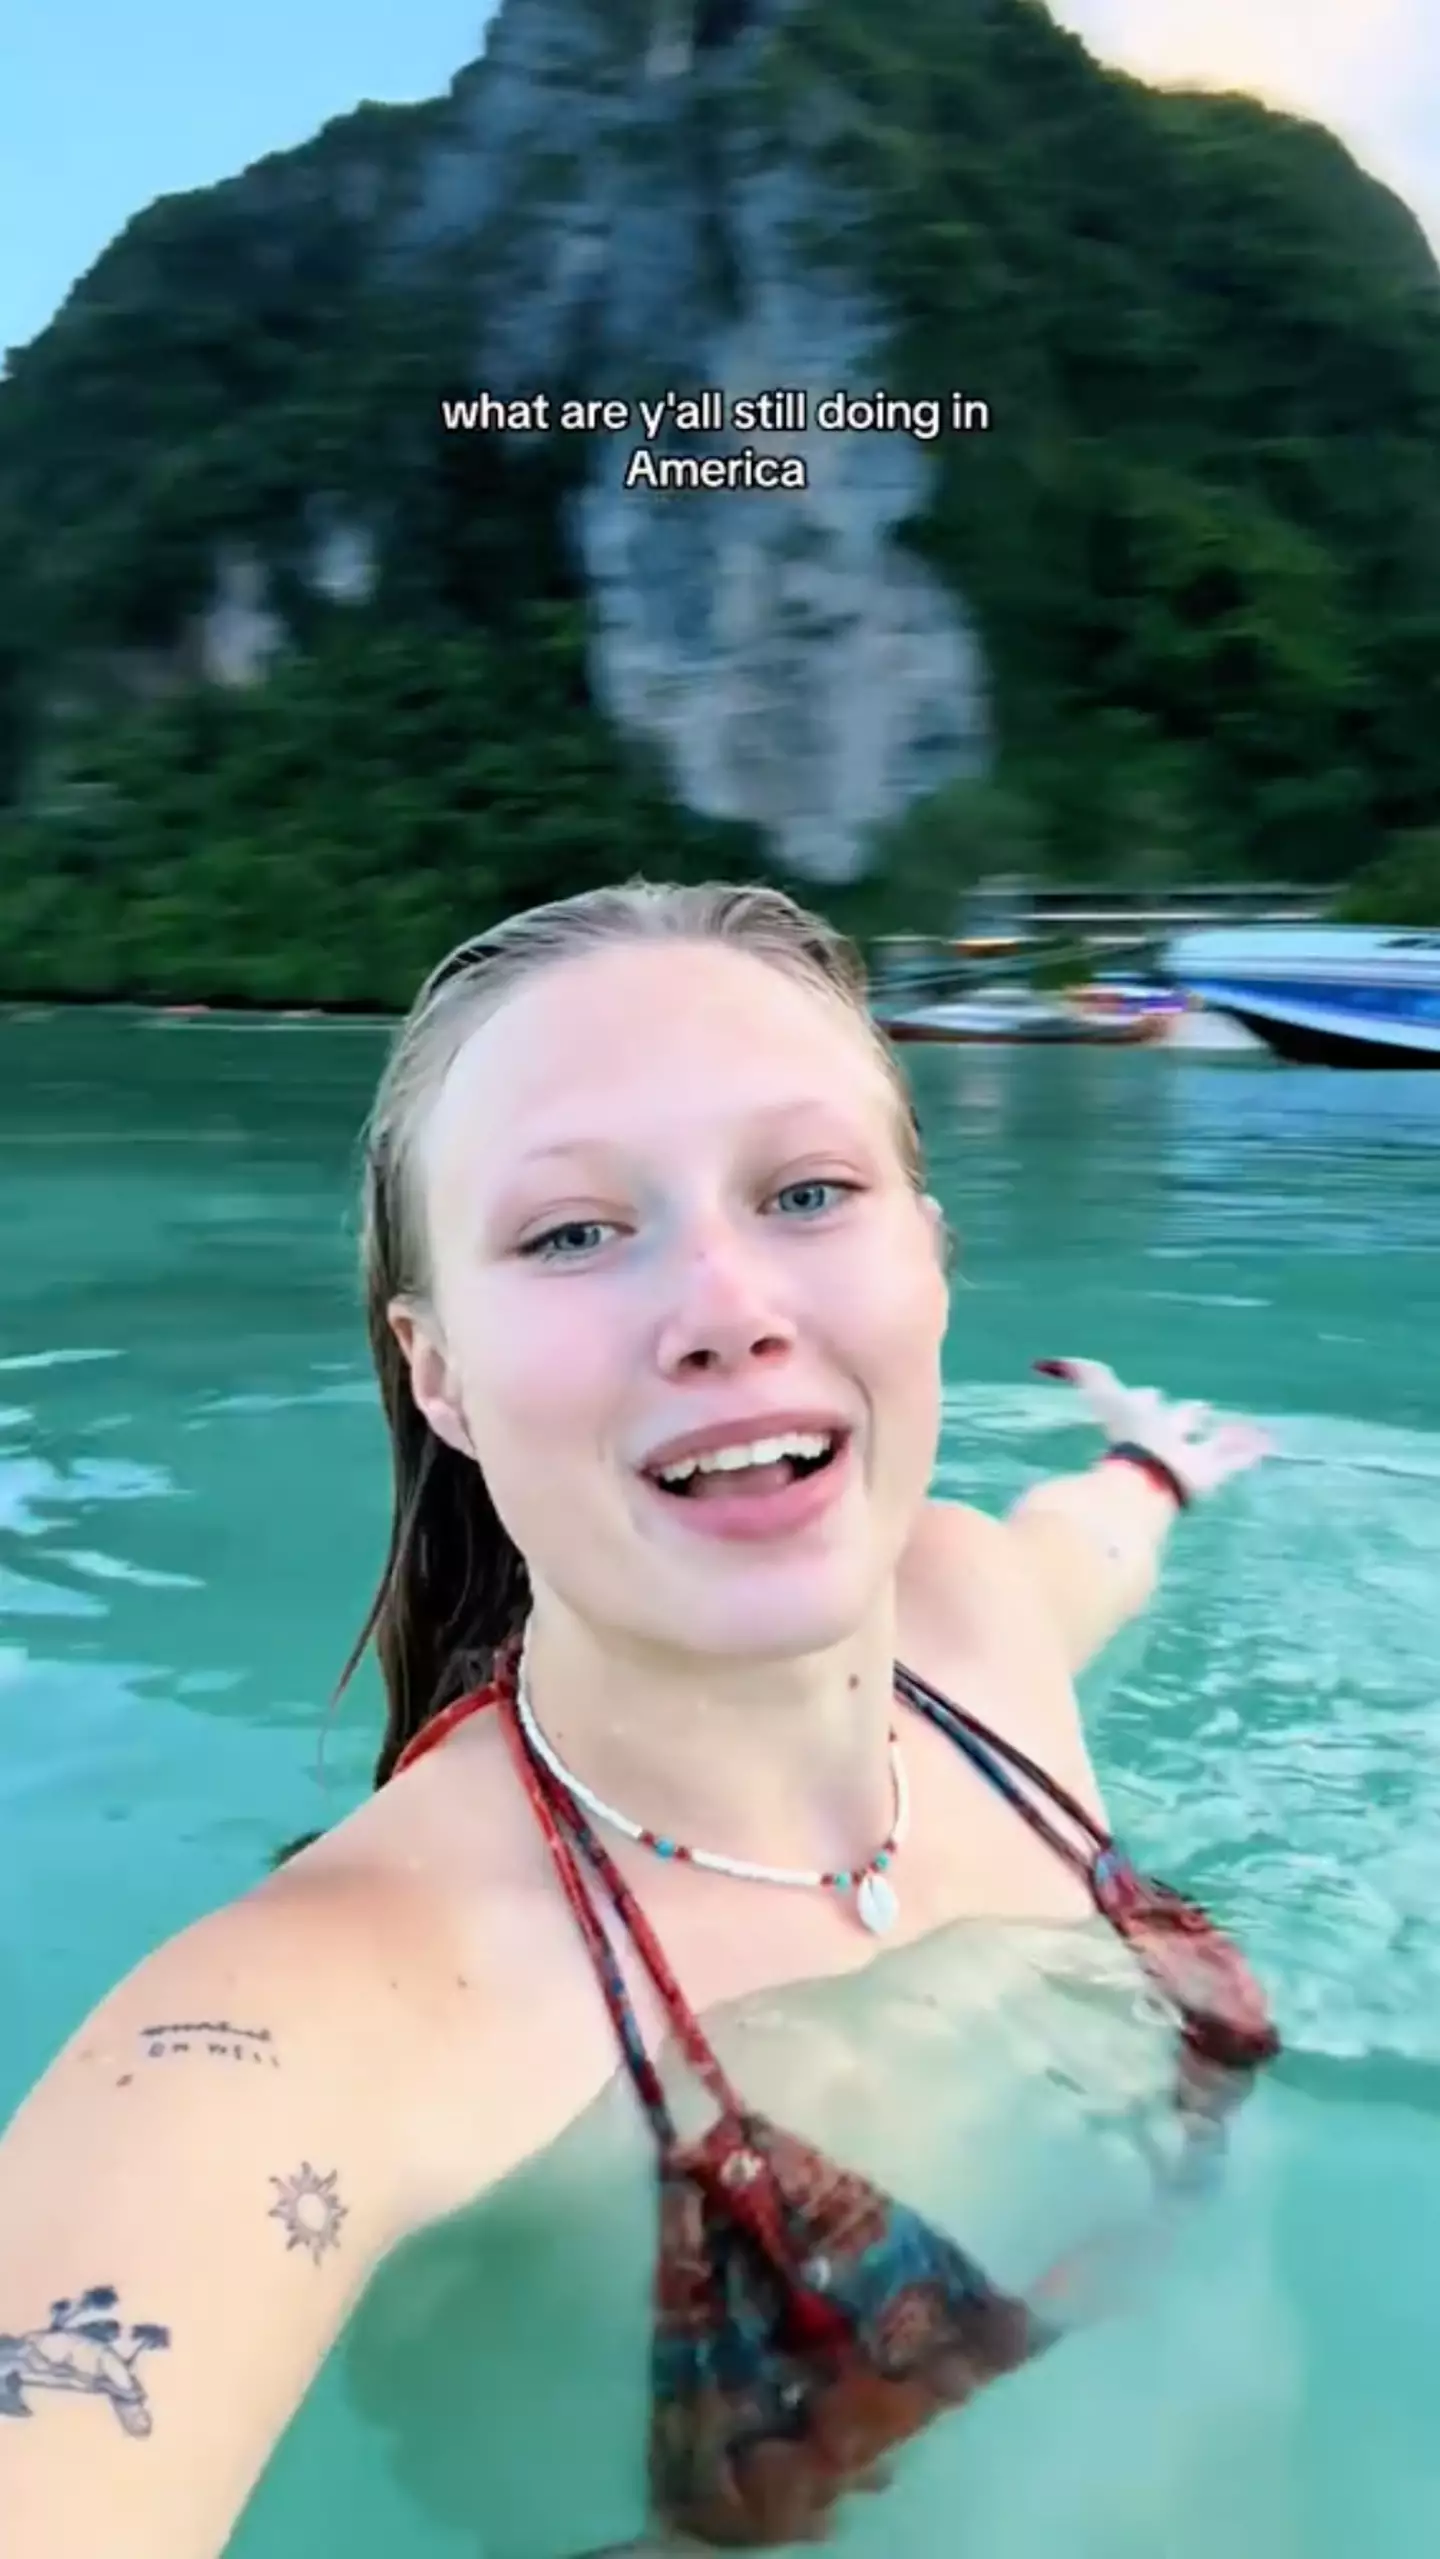 Kat Crittenden posted the video from Thailand.